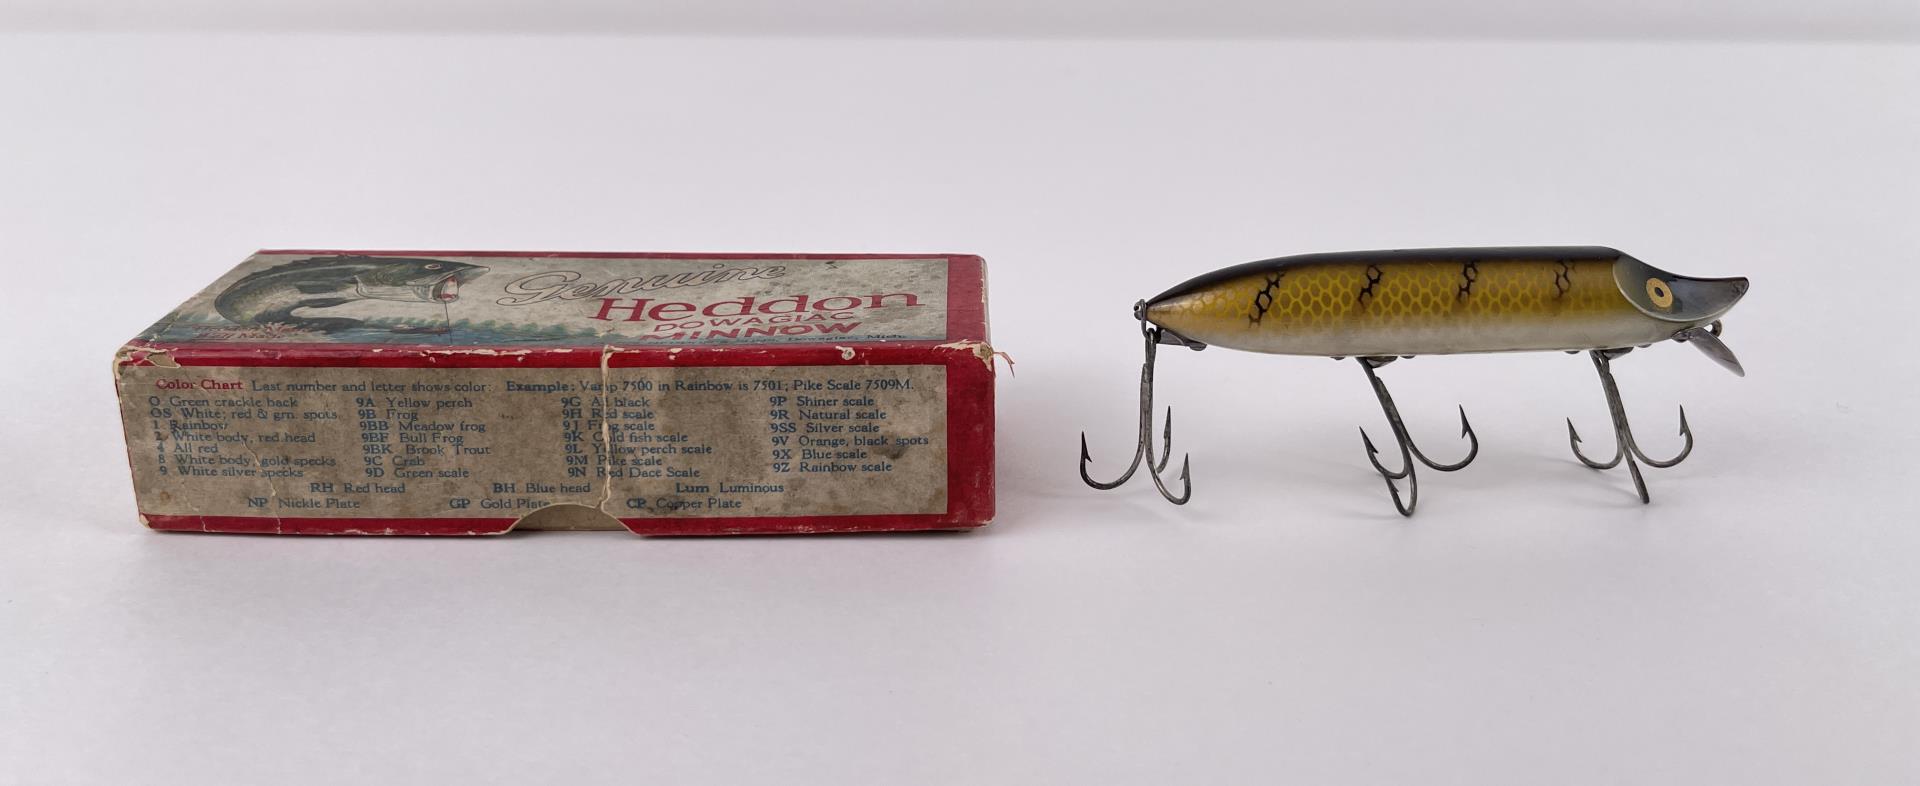 Sold at Auction: Pair of Vintage Heddon Vamps Red/White and Yellow Scale